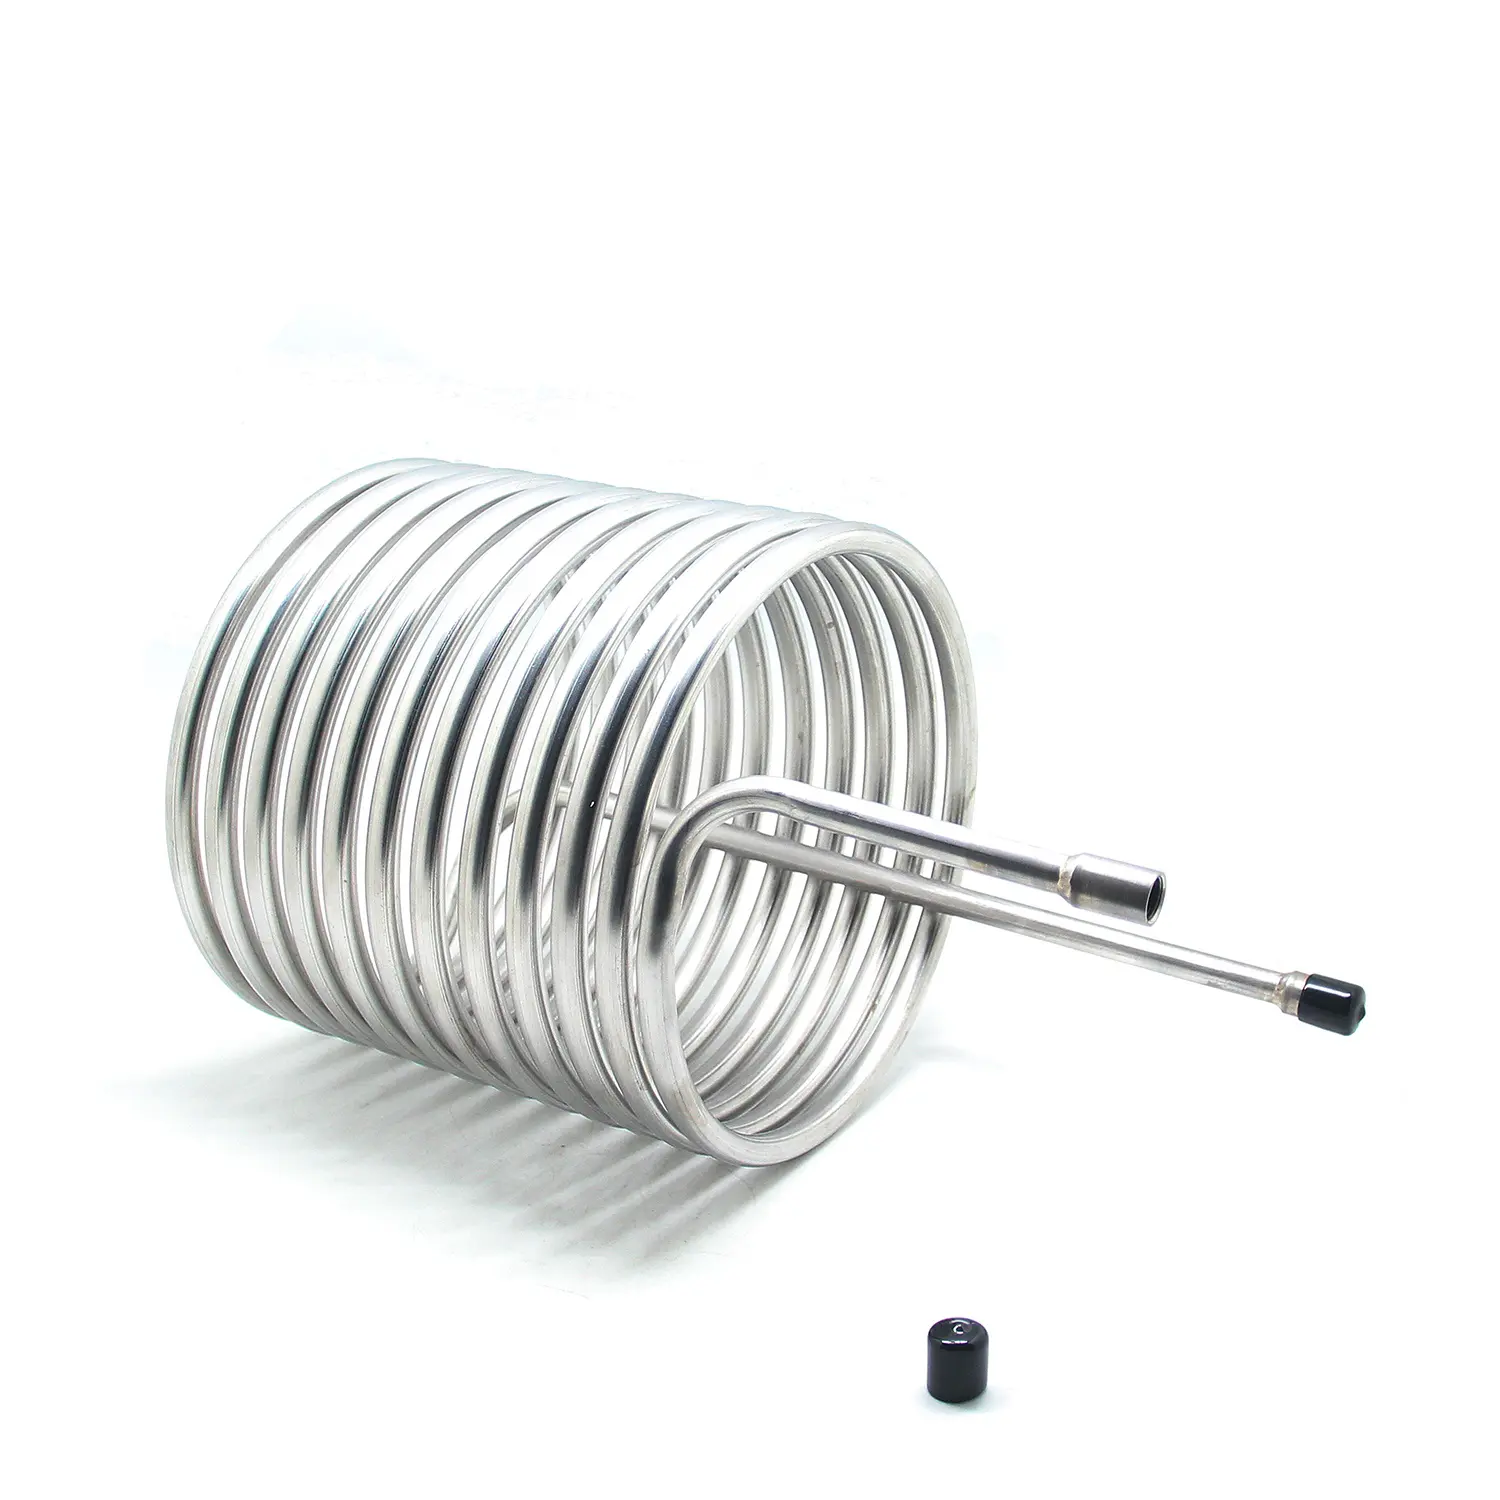 Heat exchanger Cooling coil immersion wort chiller stainless steel with JIC threaded adapter SUS304